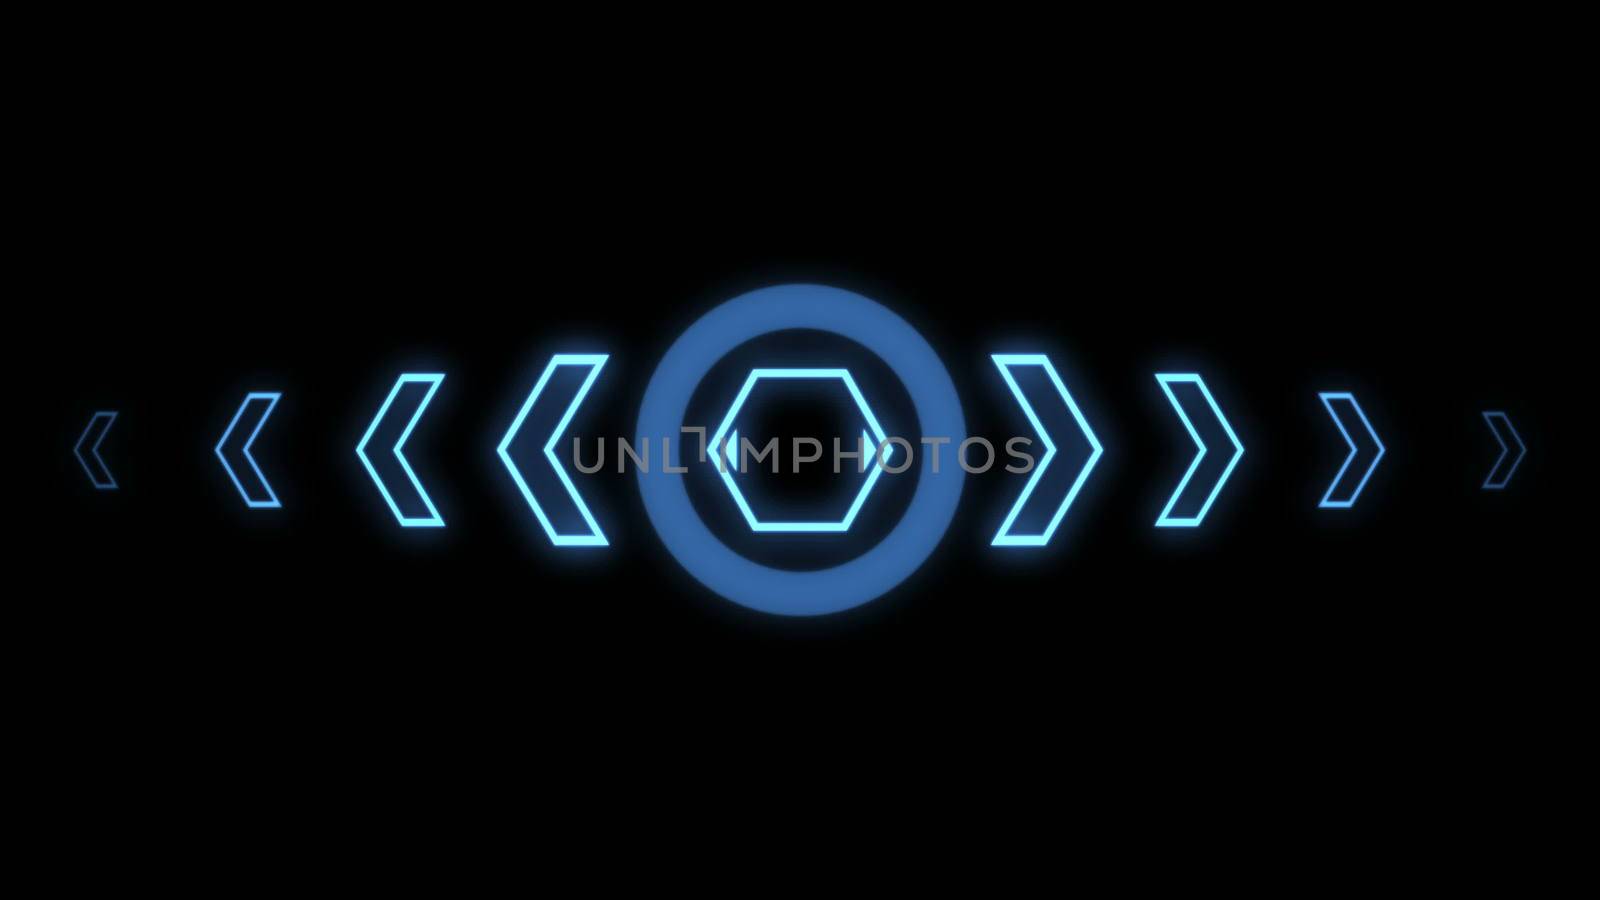 Futuristic screensaver with hex corner. HUD Heads Up Display Scanner high tech target digital read out. Abstract digital background with geometric particles. 3d rendering